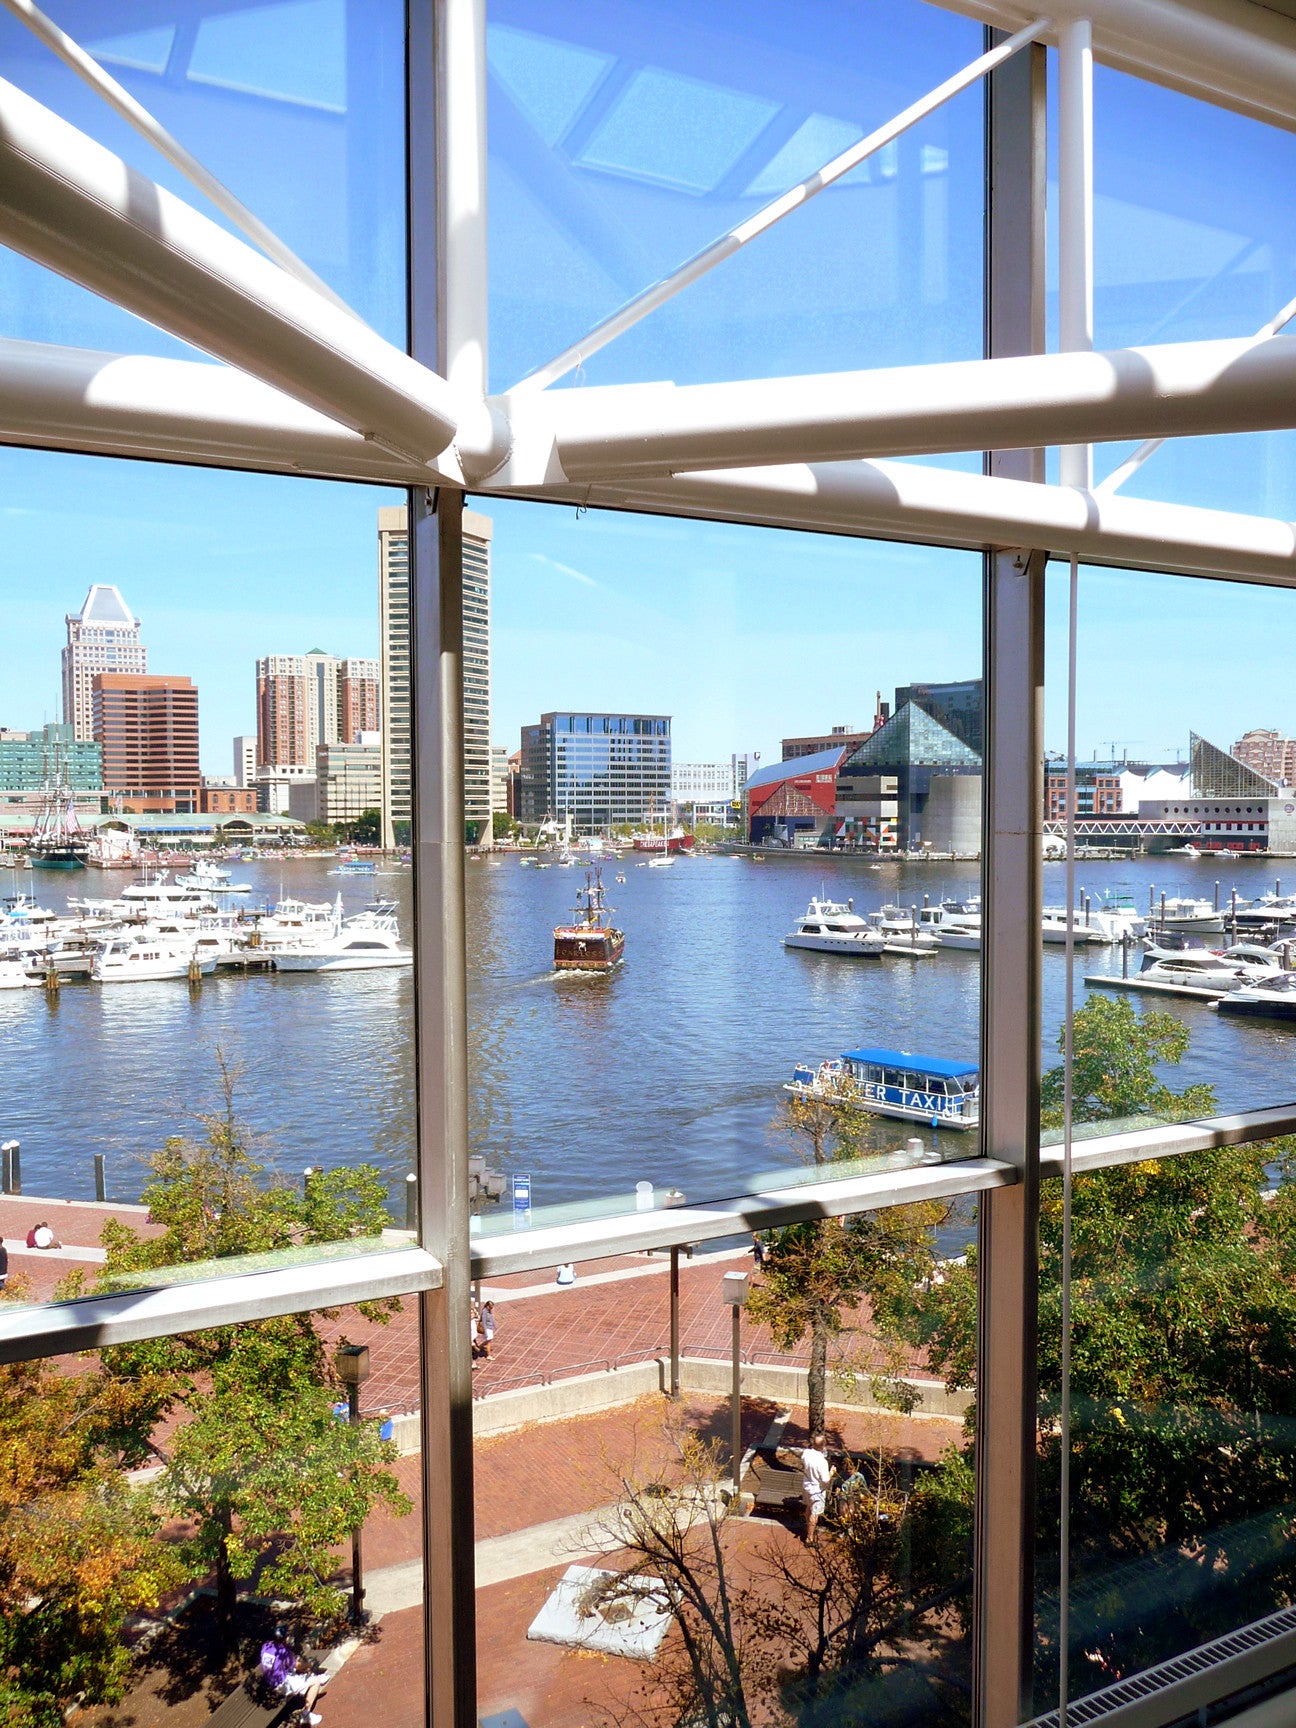 Baltimore: A Harbor, Parks, History, Seafood & Art - 3-Day Itinerary